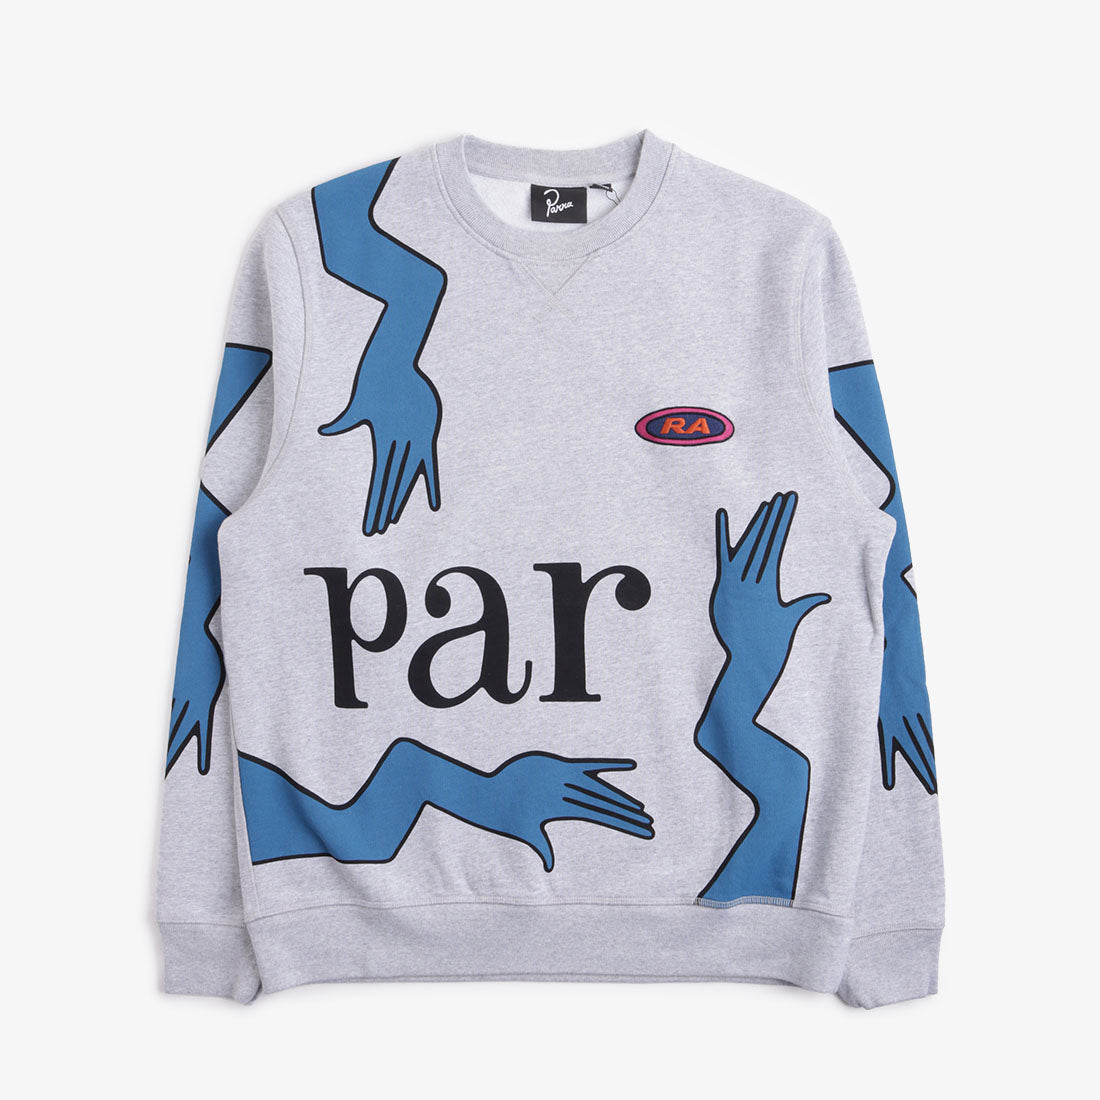 by Parra / Grab The Flag Crew Neck Sweat